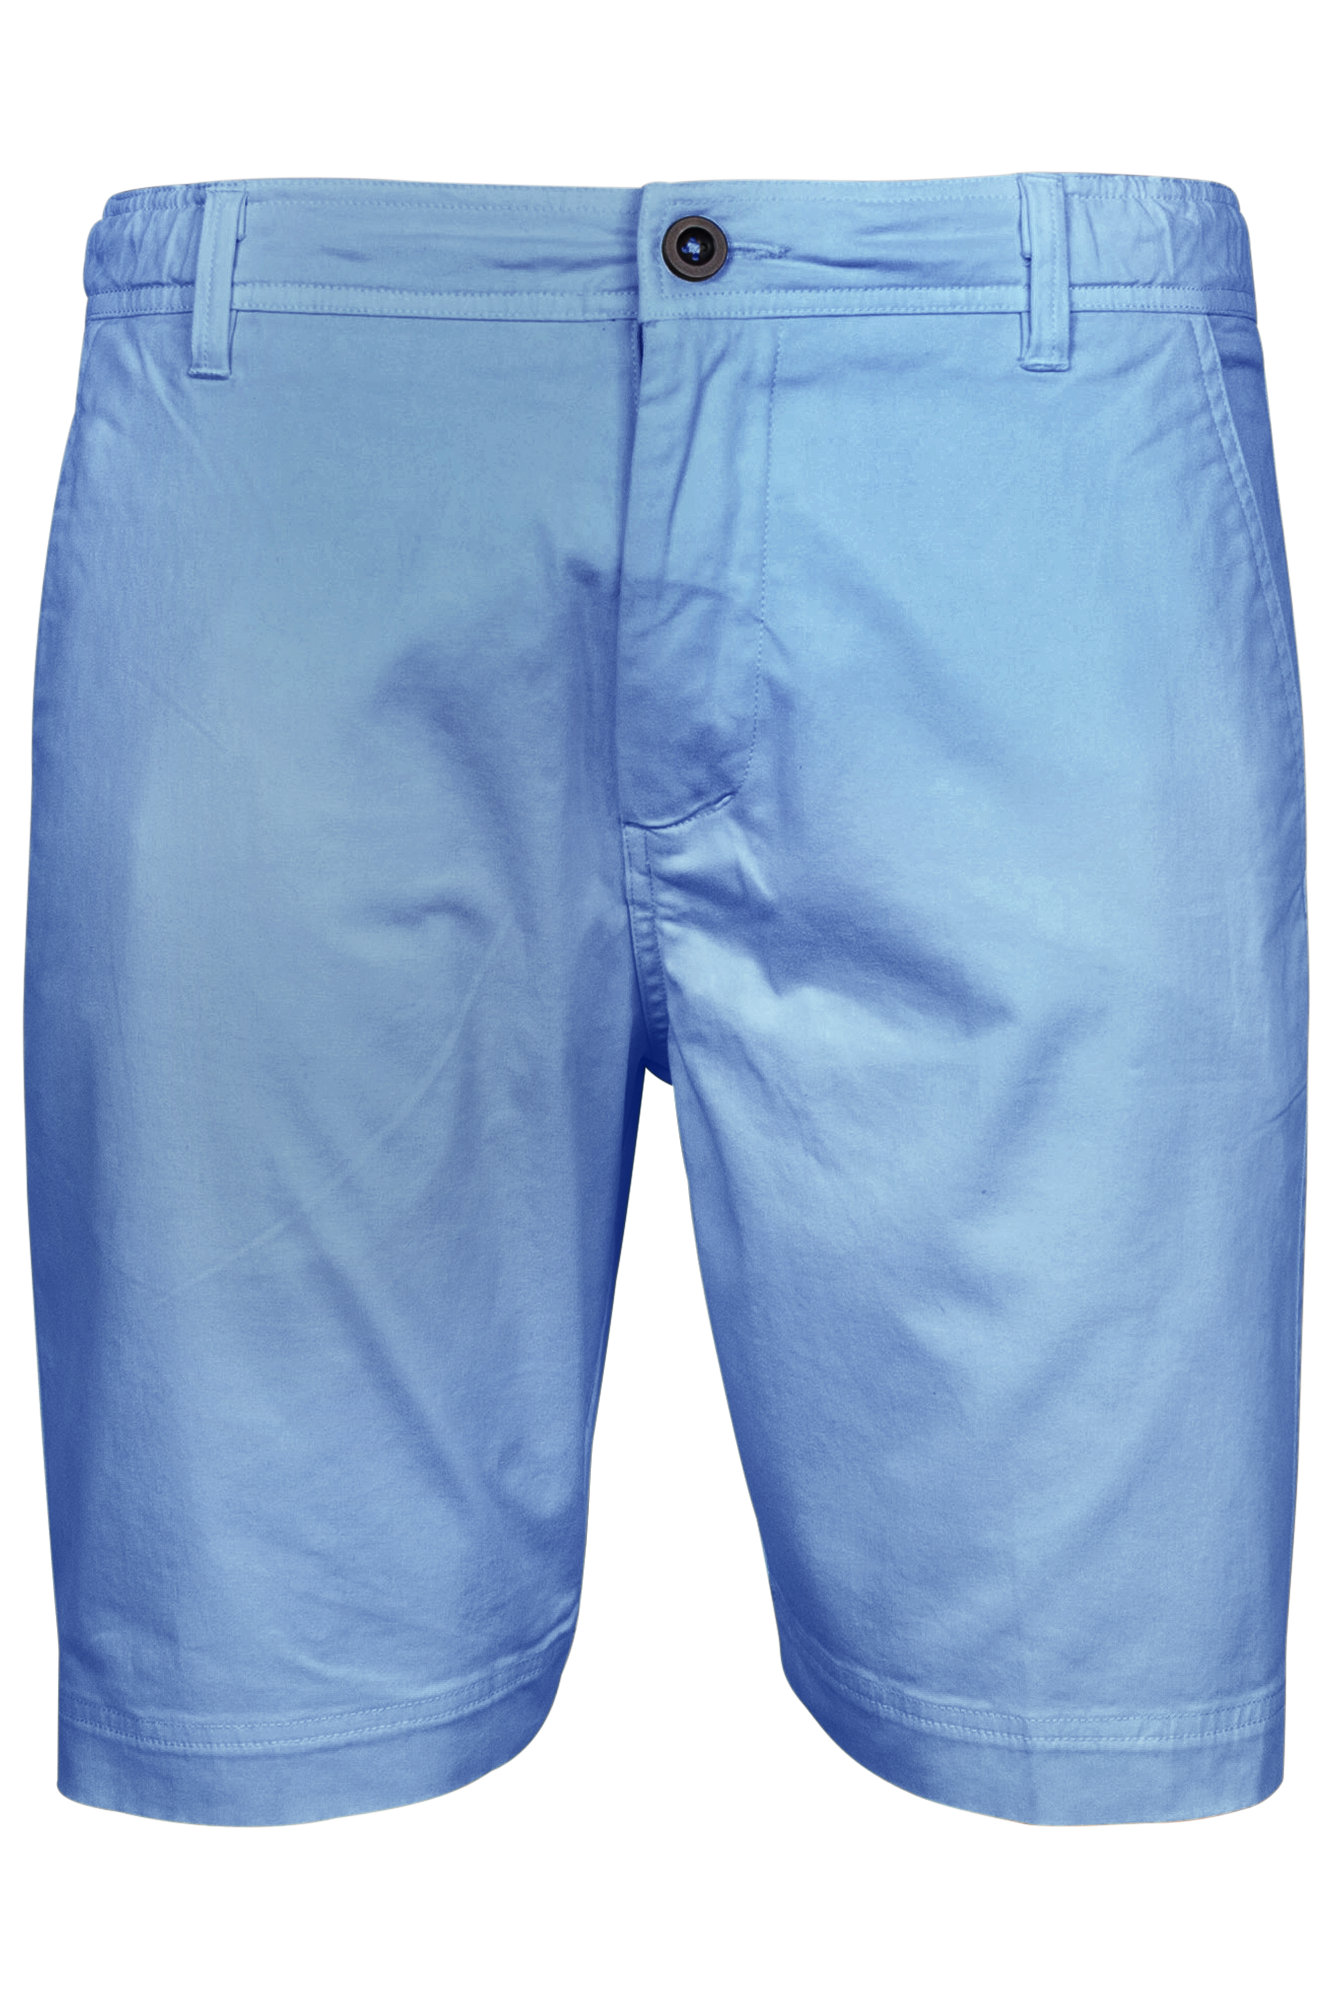 Porter shorts in light blue by Giordano